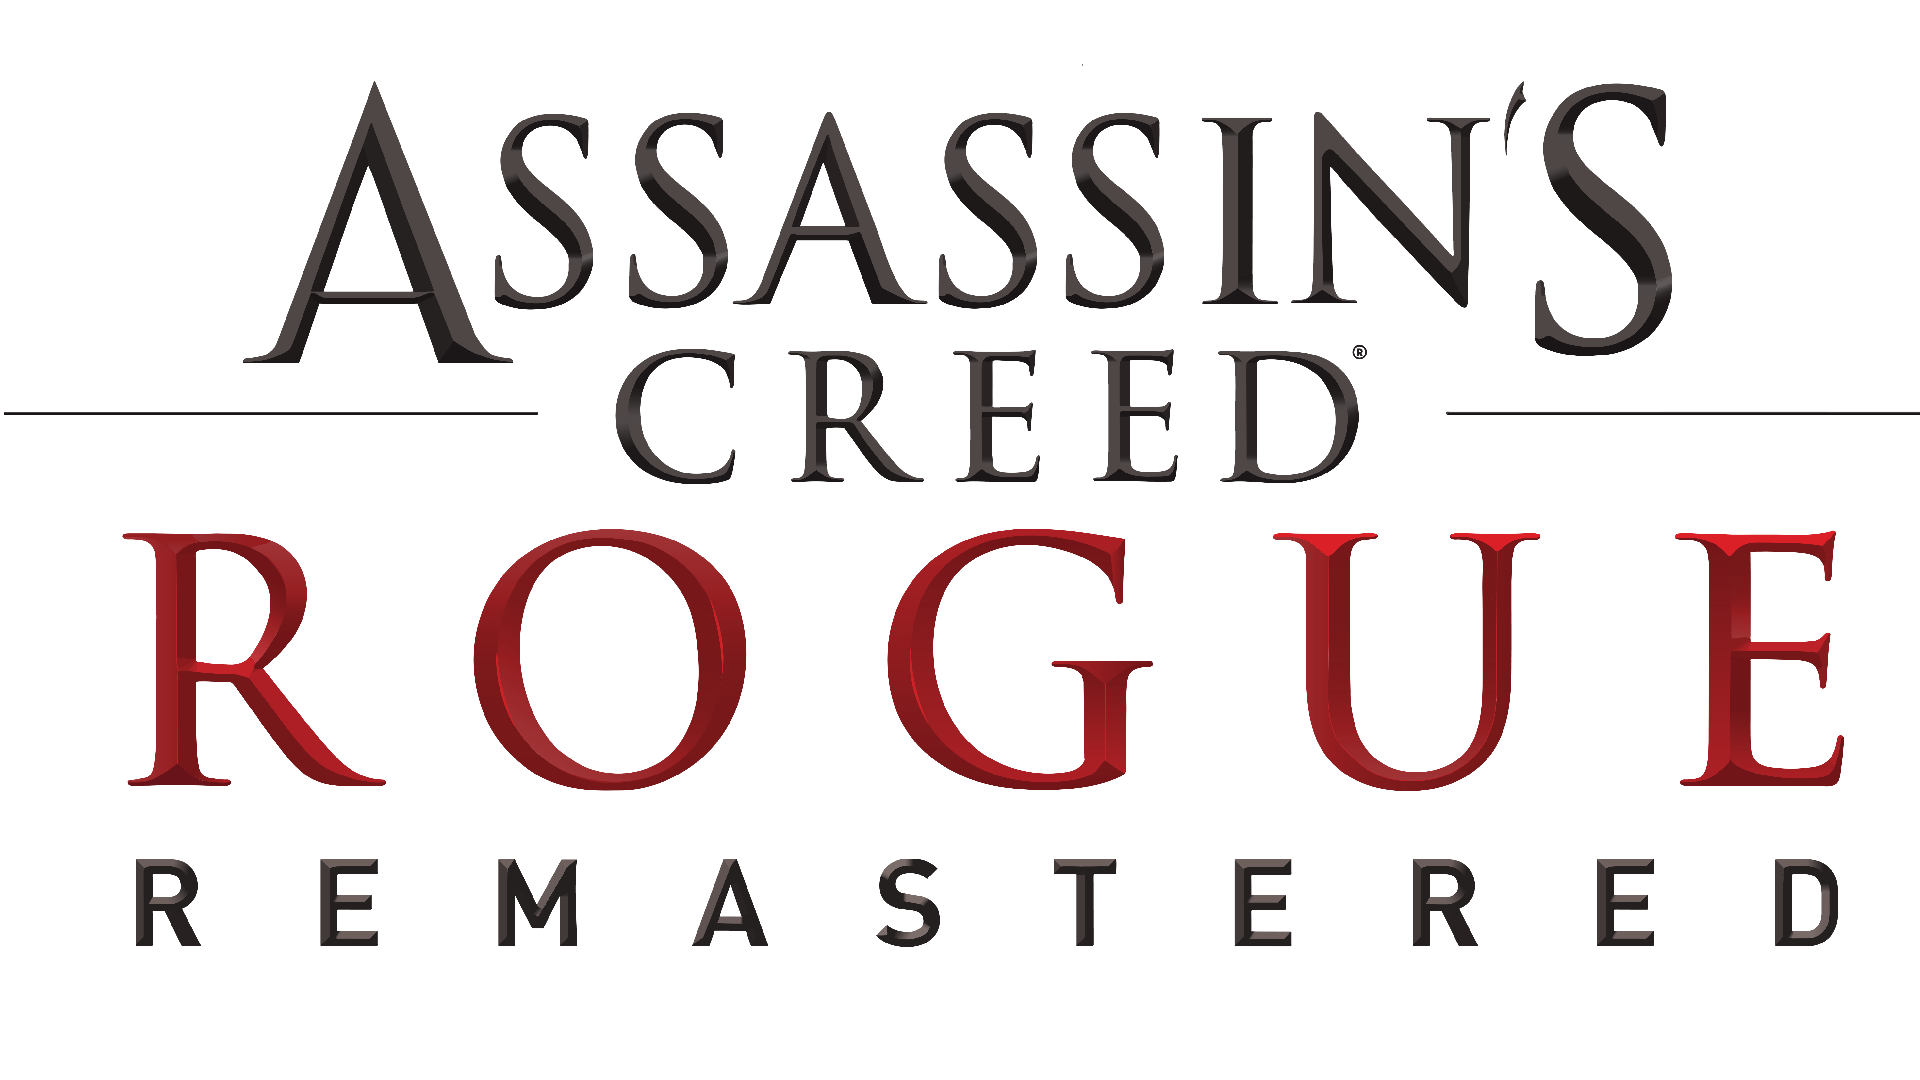 Assassin s Creed: Rogue: Remastered xbox one